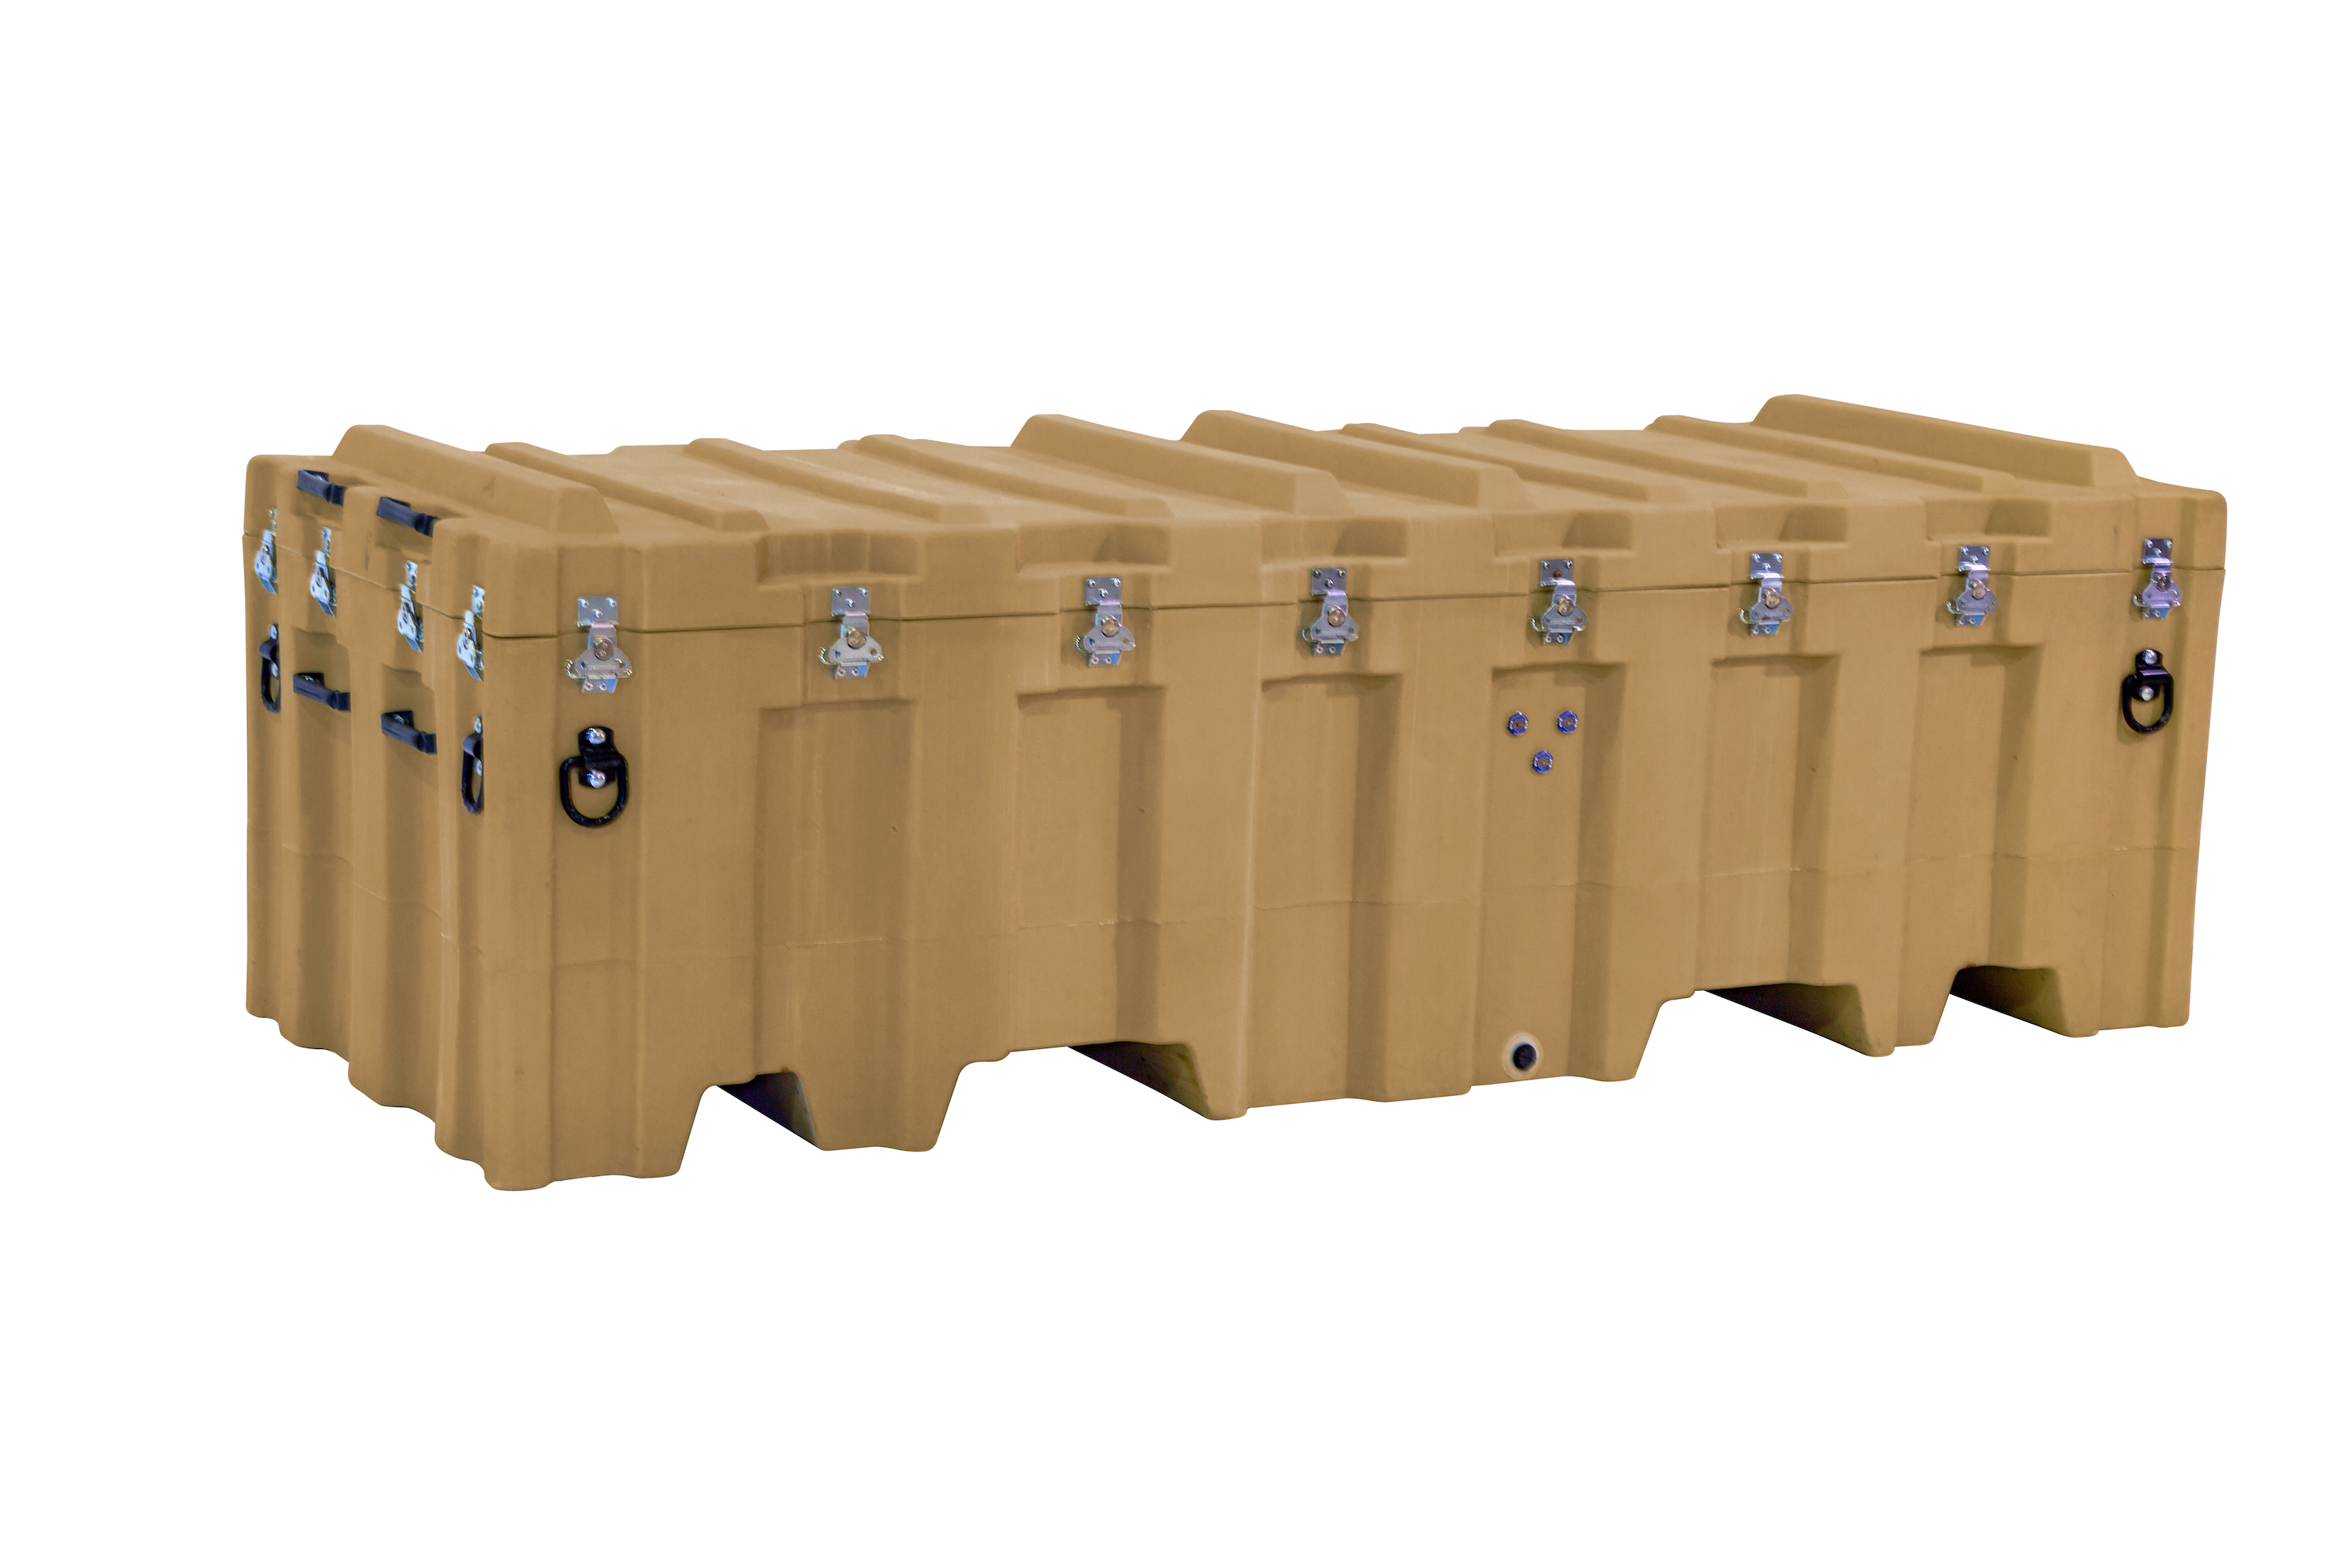 CAMSS Military Shelter Tan Storage Crate